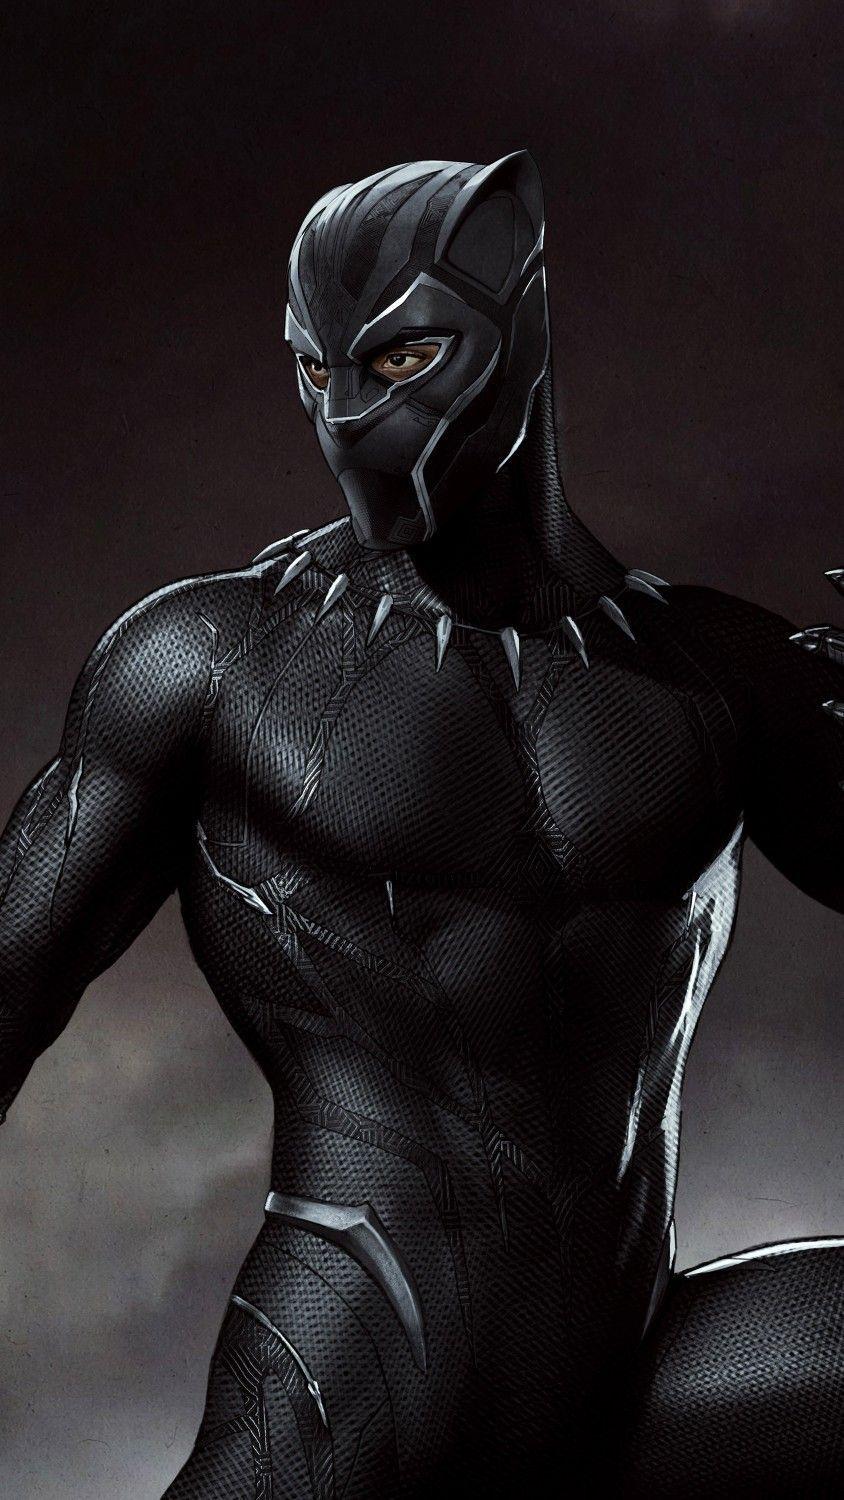 Black Panther #Marvel #Movies. Wallpaper HD for Smartphone